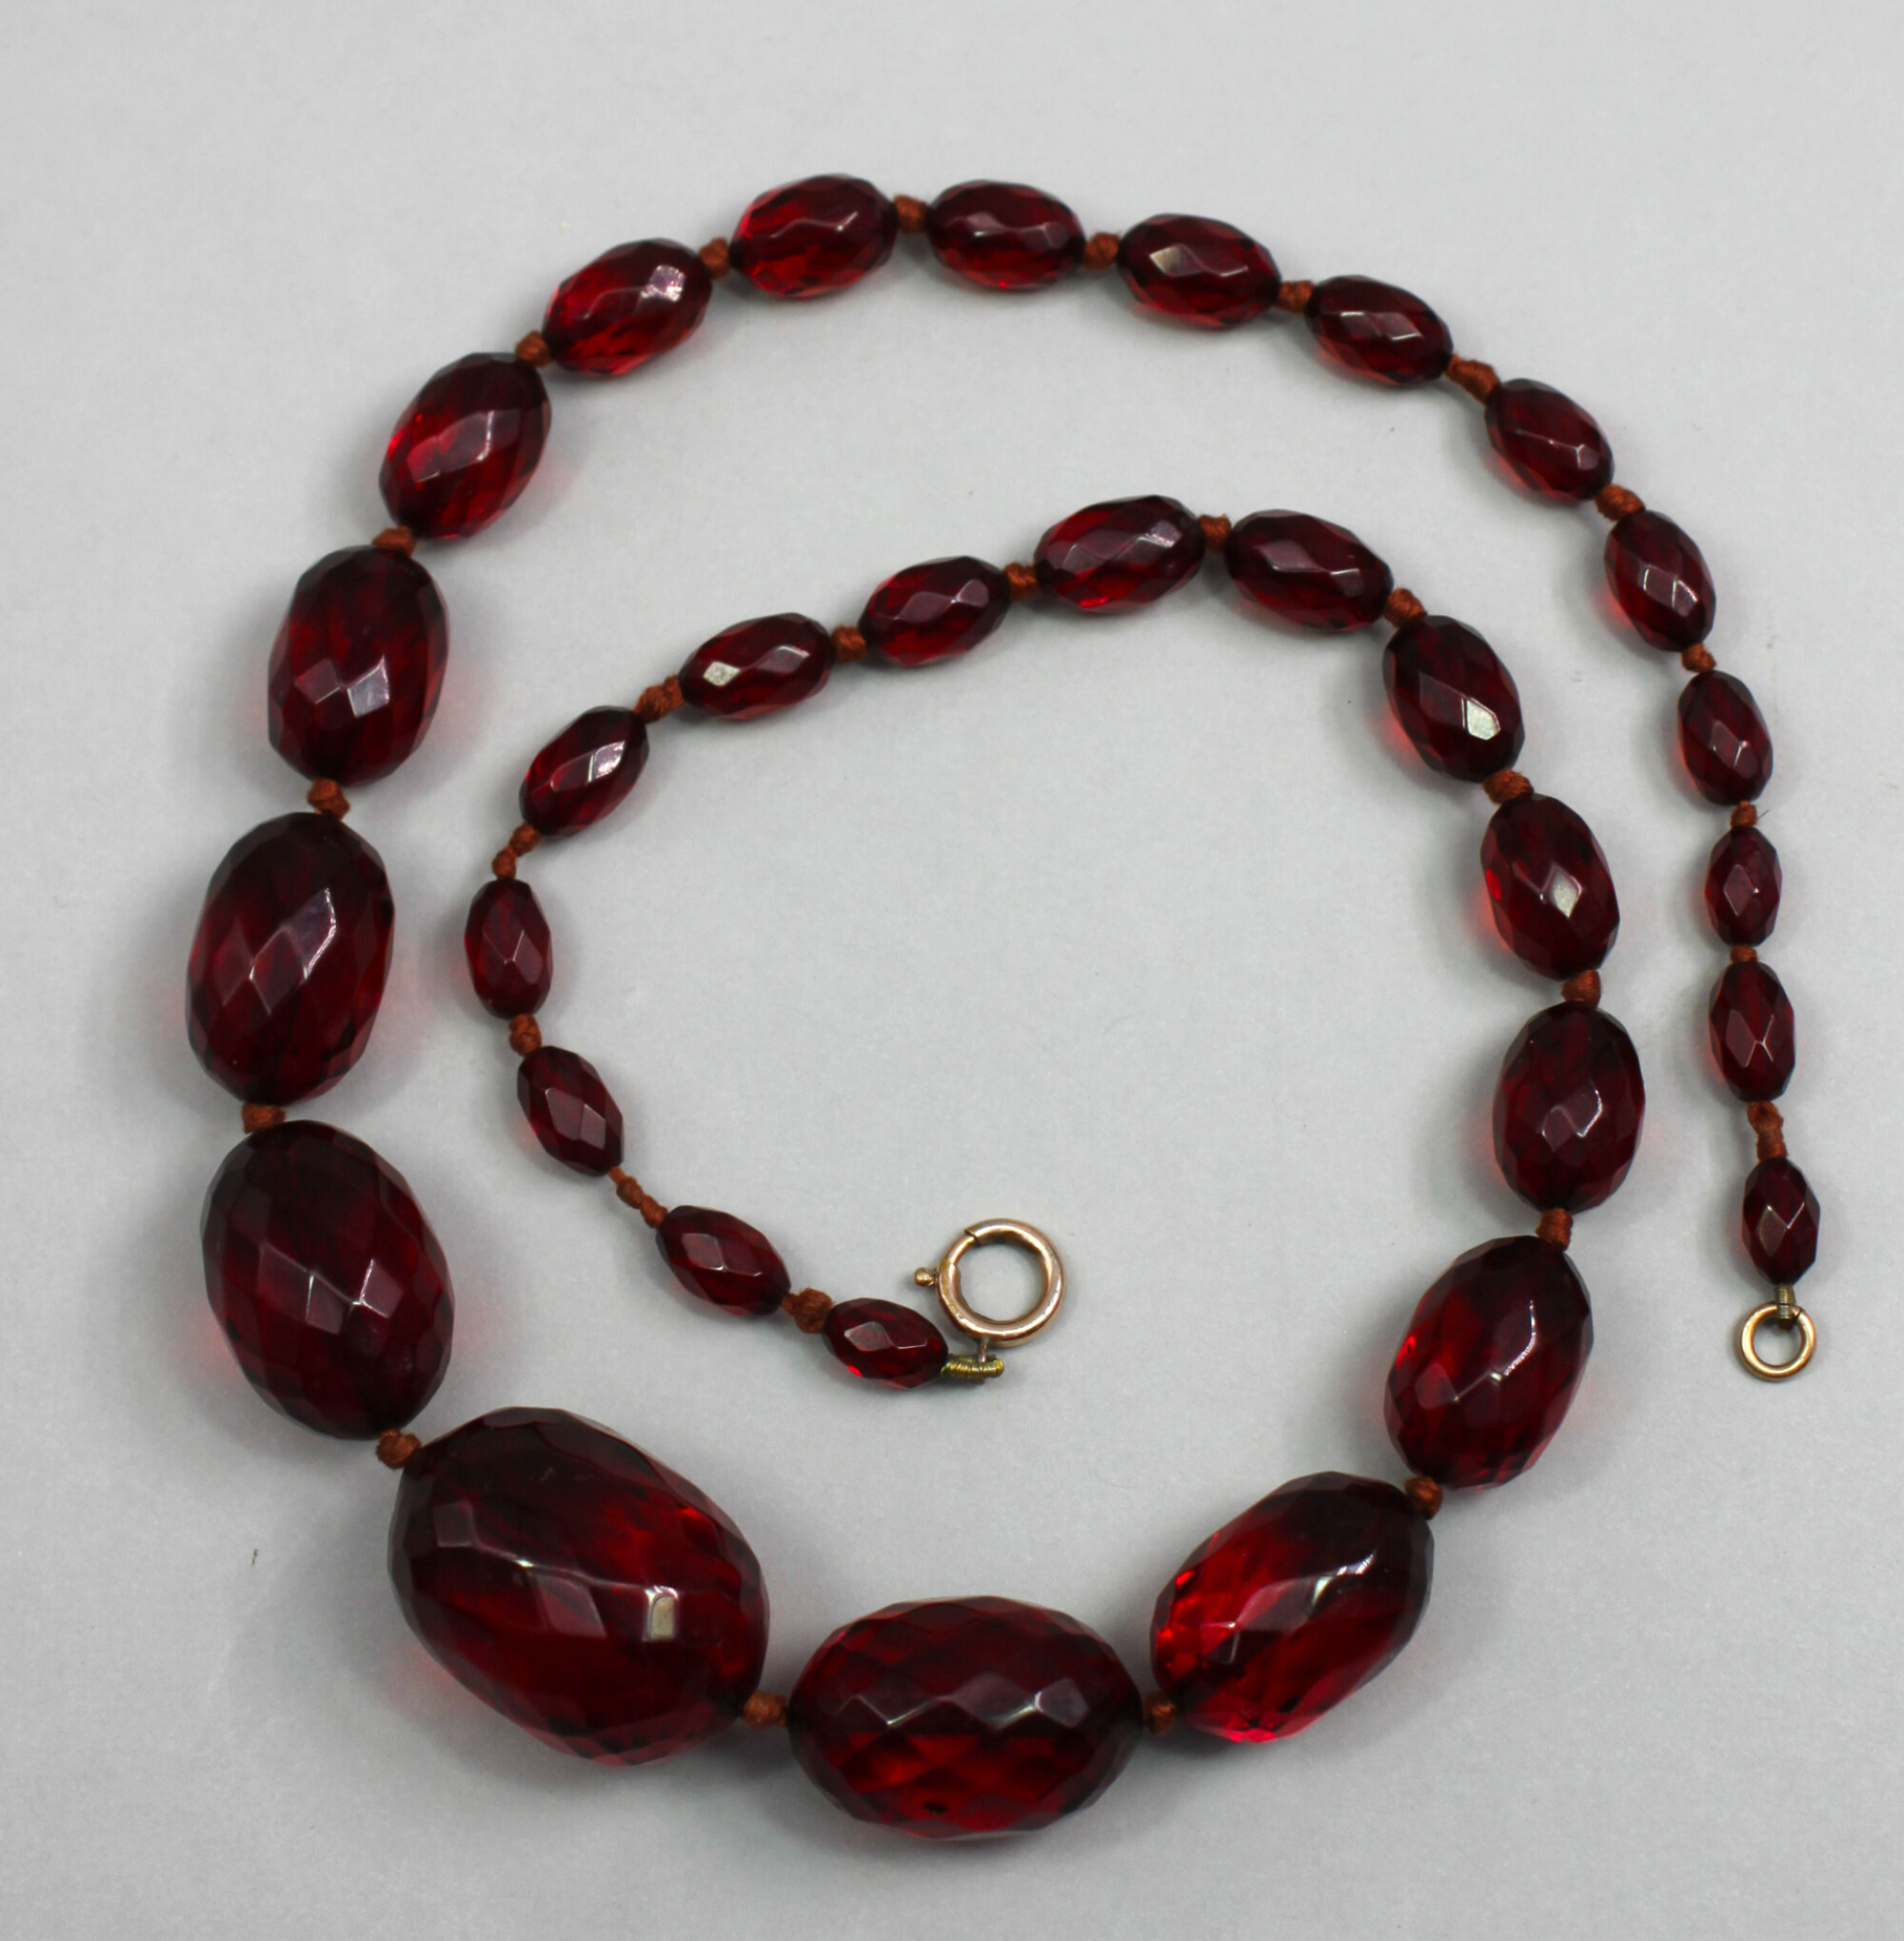 Vintage Gorgeous Cherry Amber Bakelite Beads.made-in USA in 1930s. - Etsy